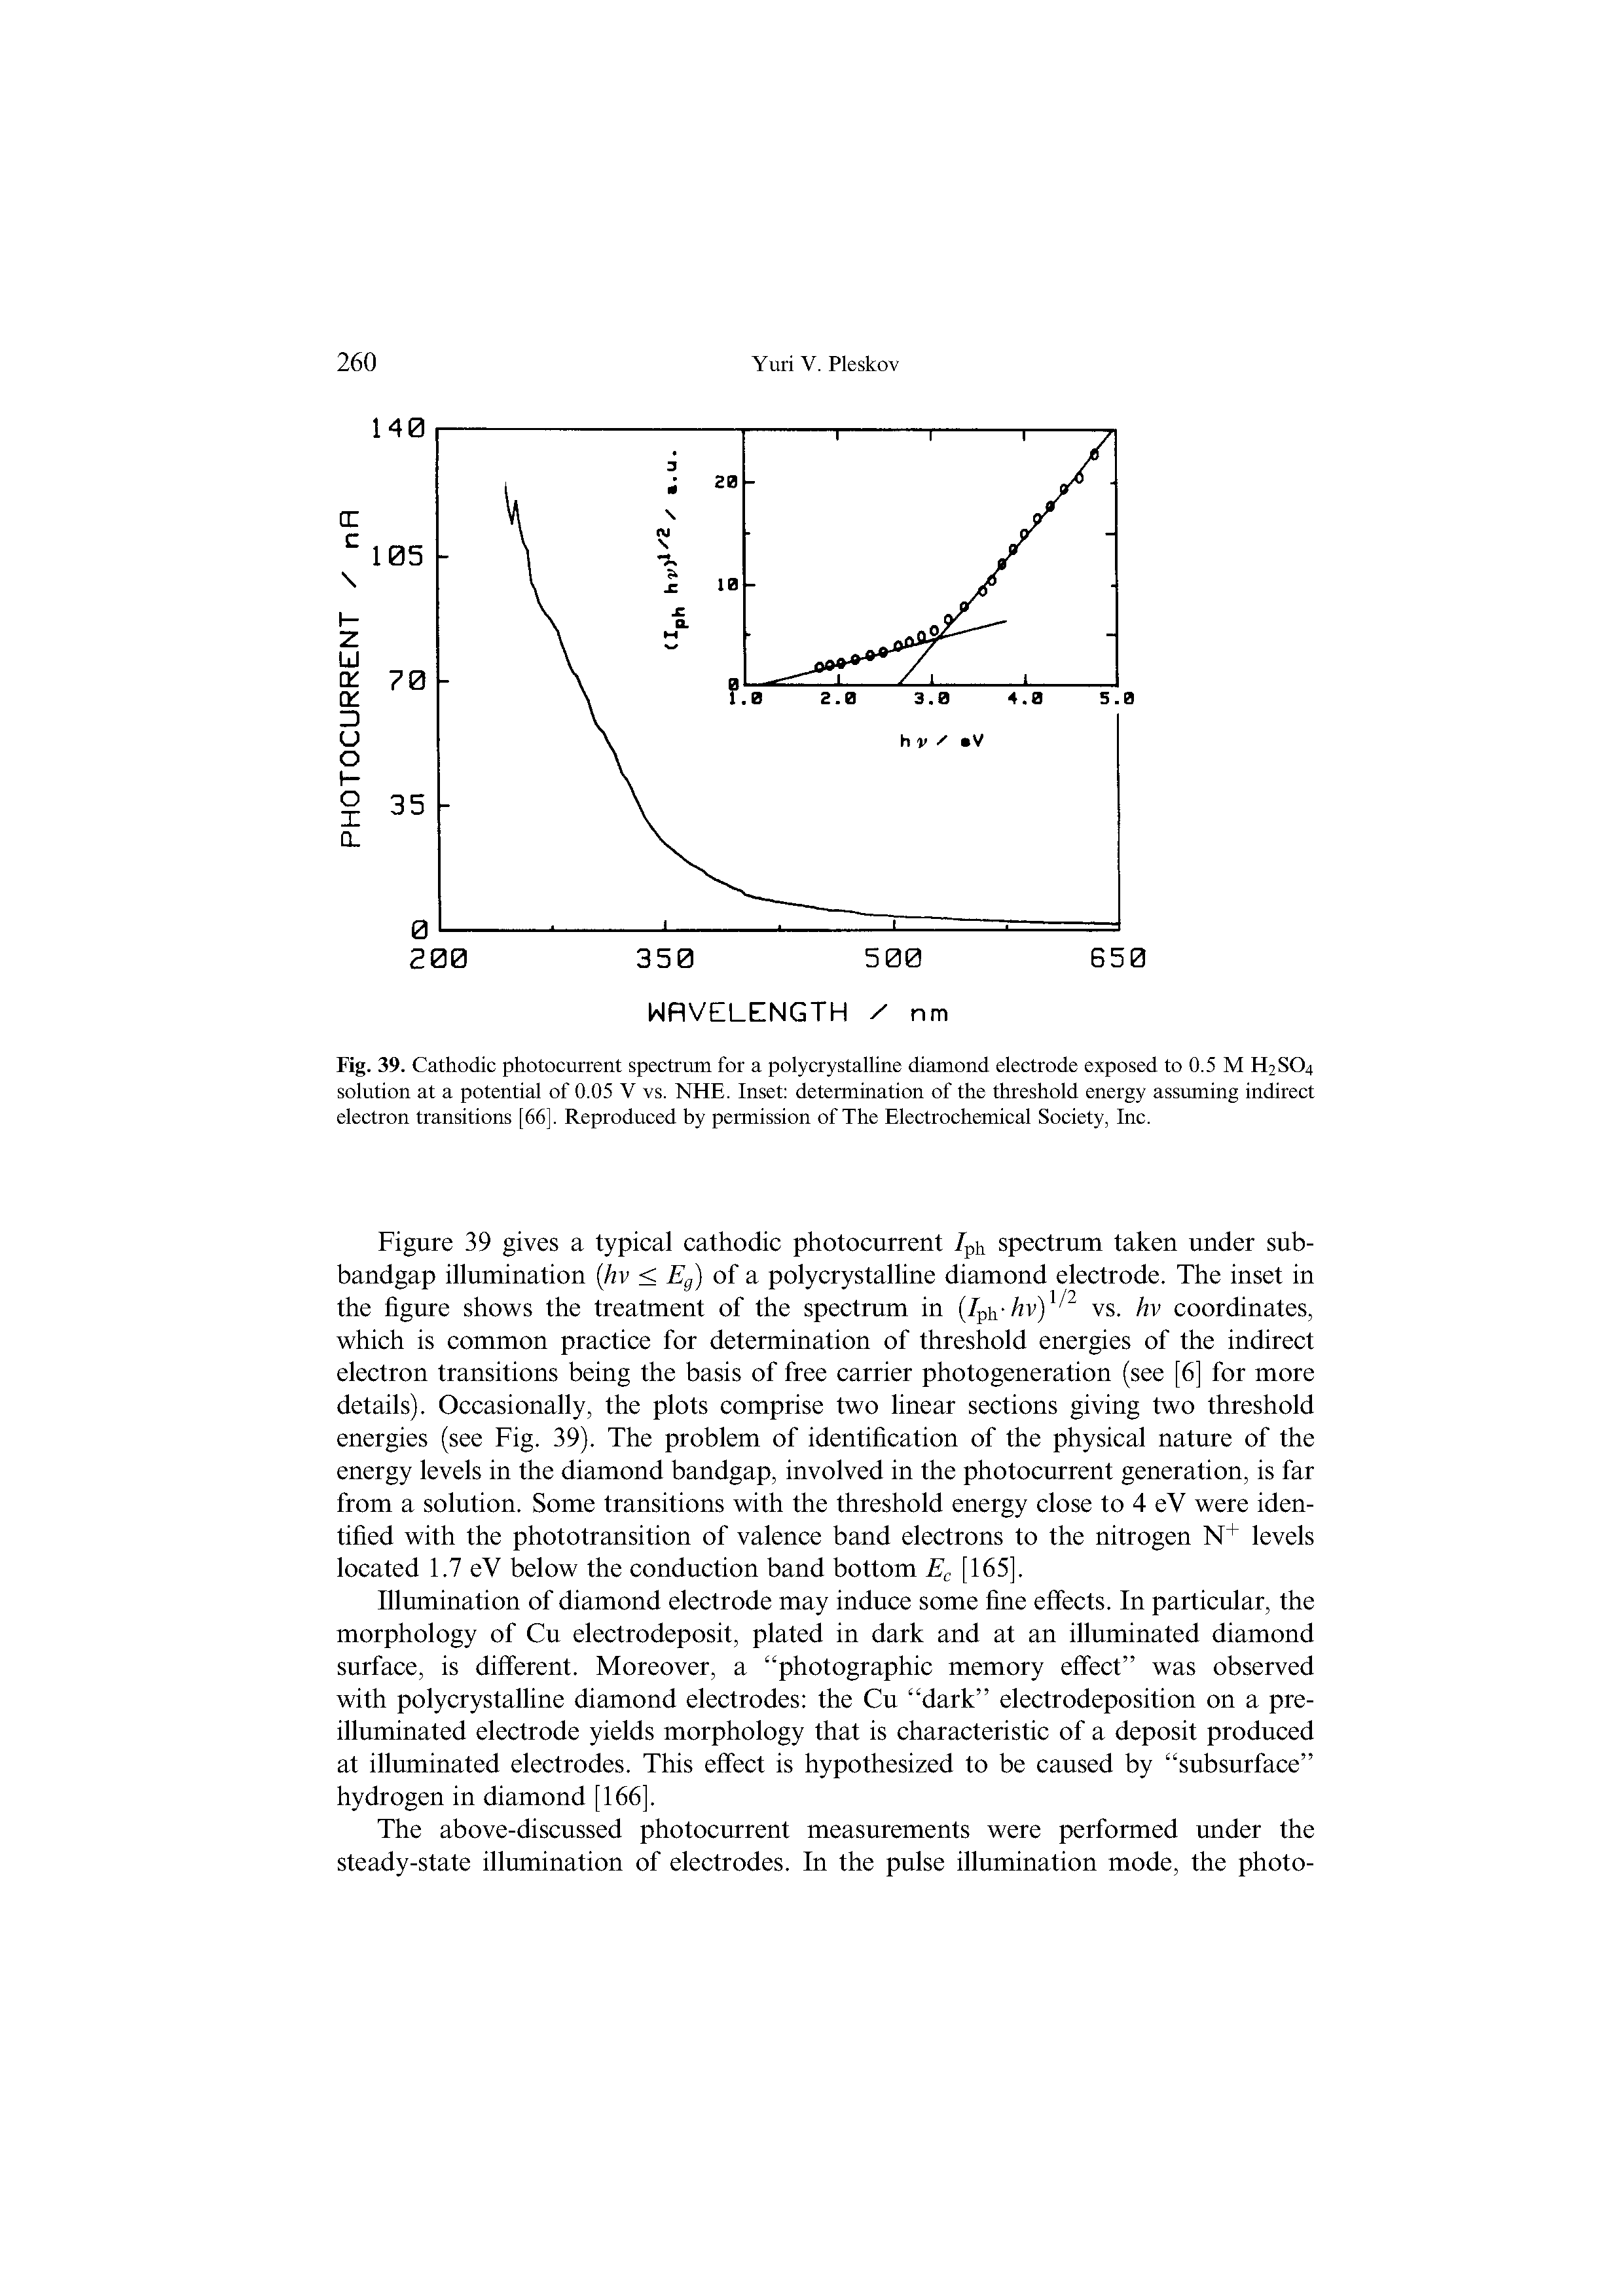 Fig. 39. Cathodic photocurrent spectrum for a polycrystalline diamond electrode exposed to 0.5 M H2SO4 solution at a potential of 0.05 V vs. NHE. Inset determination of the threshold energy assuming indirect electron transitions [66], Reproduced by permission of The Electrochemical Society, Inc.